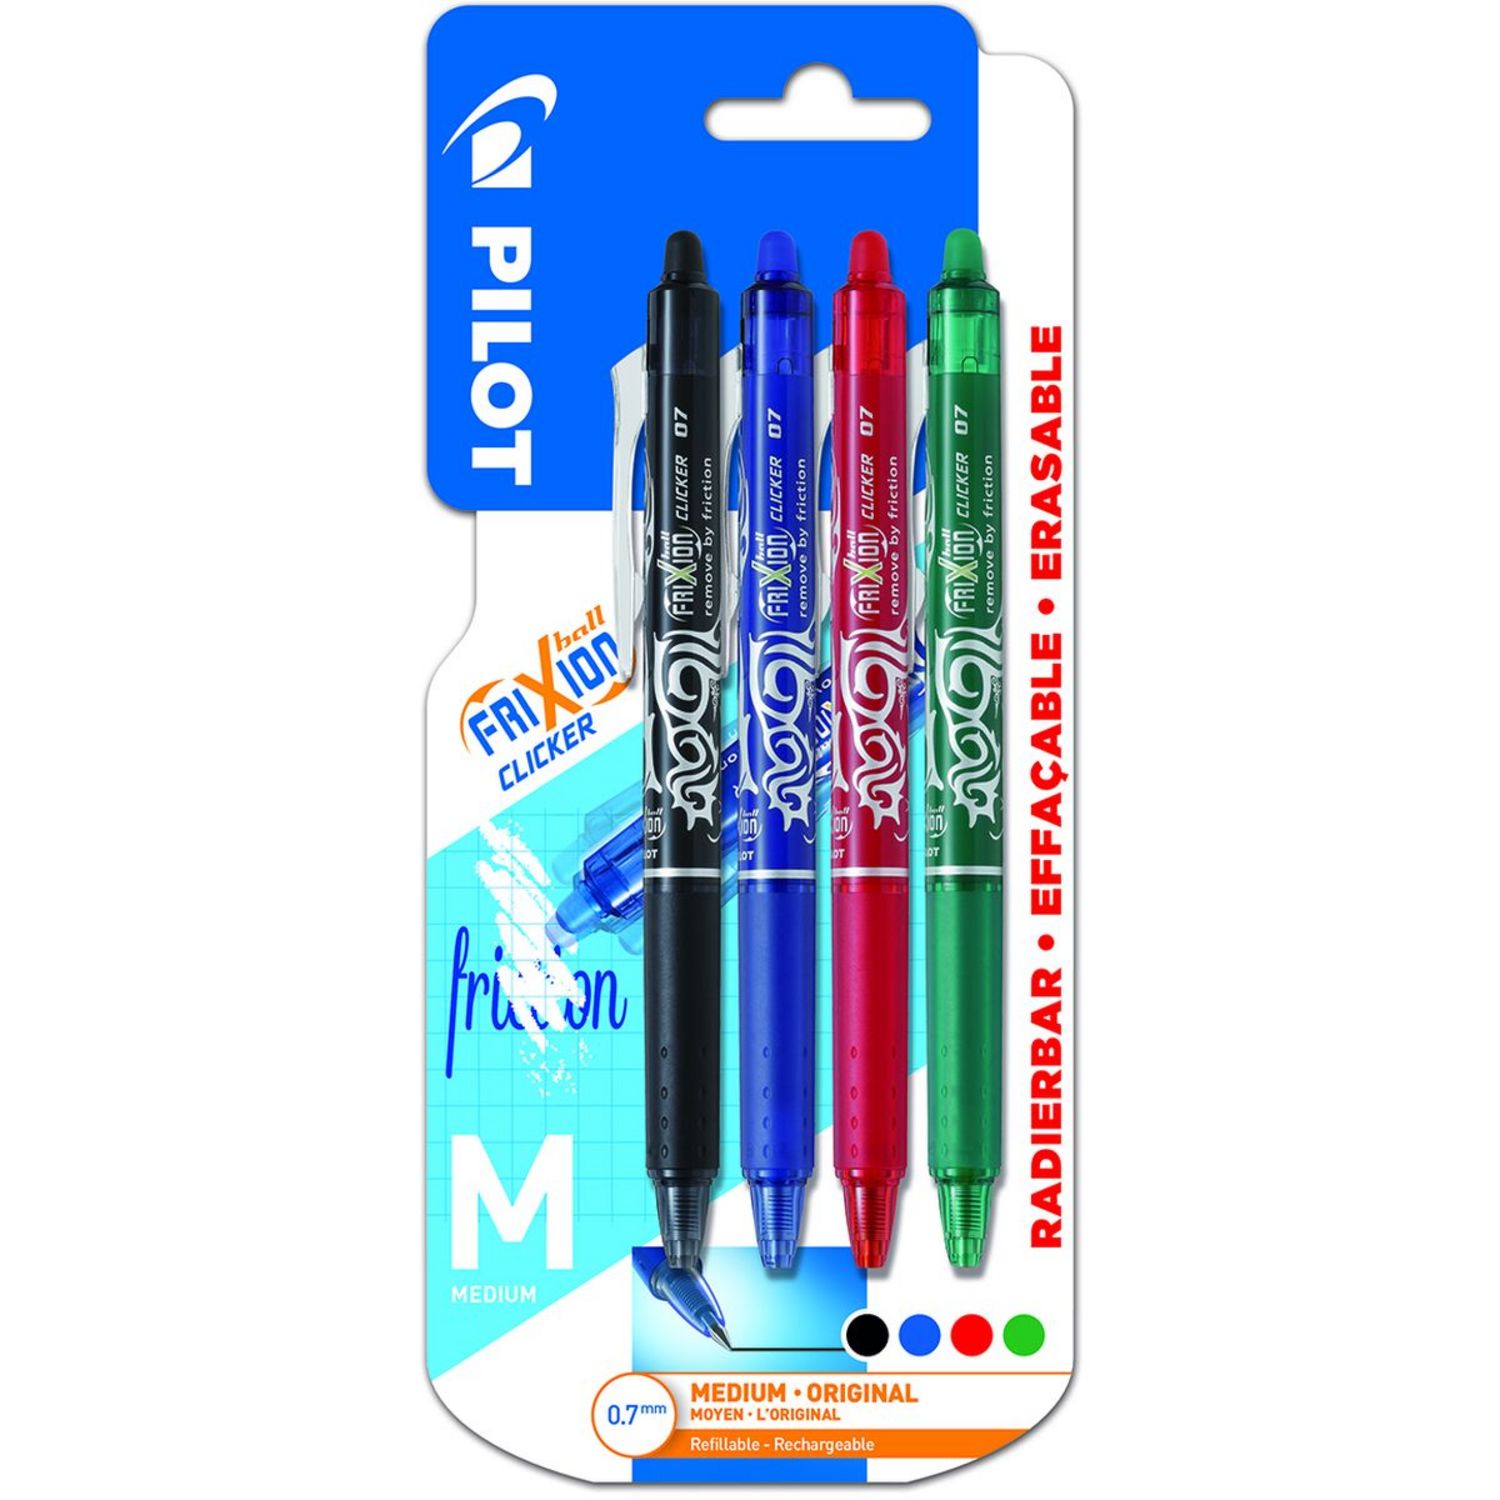 STYLO GOMME RECHARGEABLE 